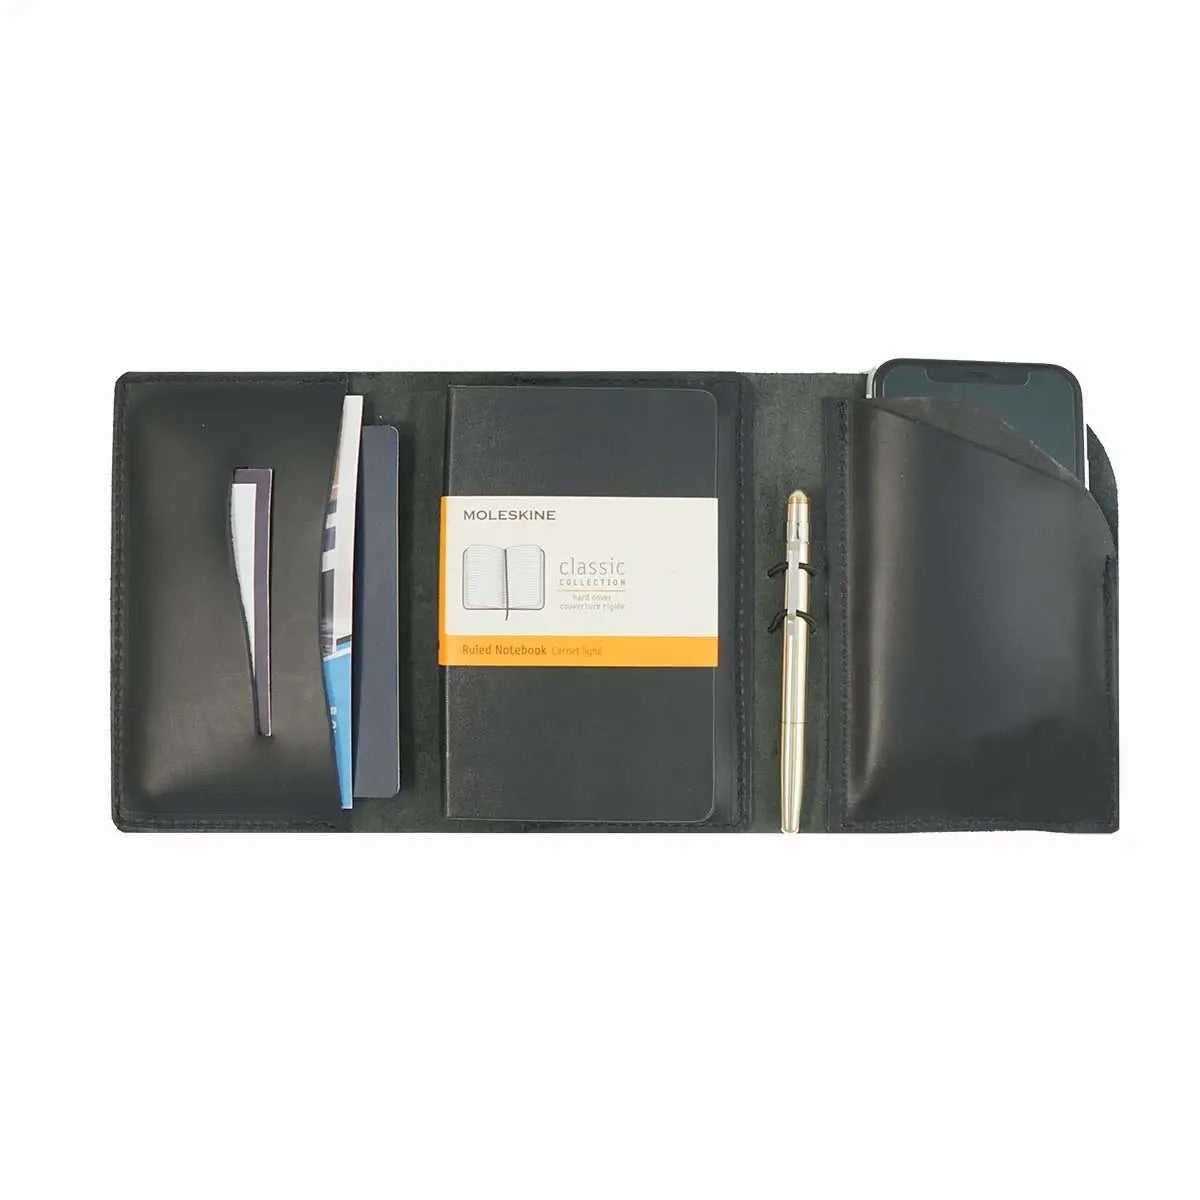 Moleskine Classic Pocket Leather Notebook Cover 3.5" x 5.5"